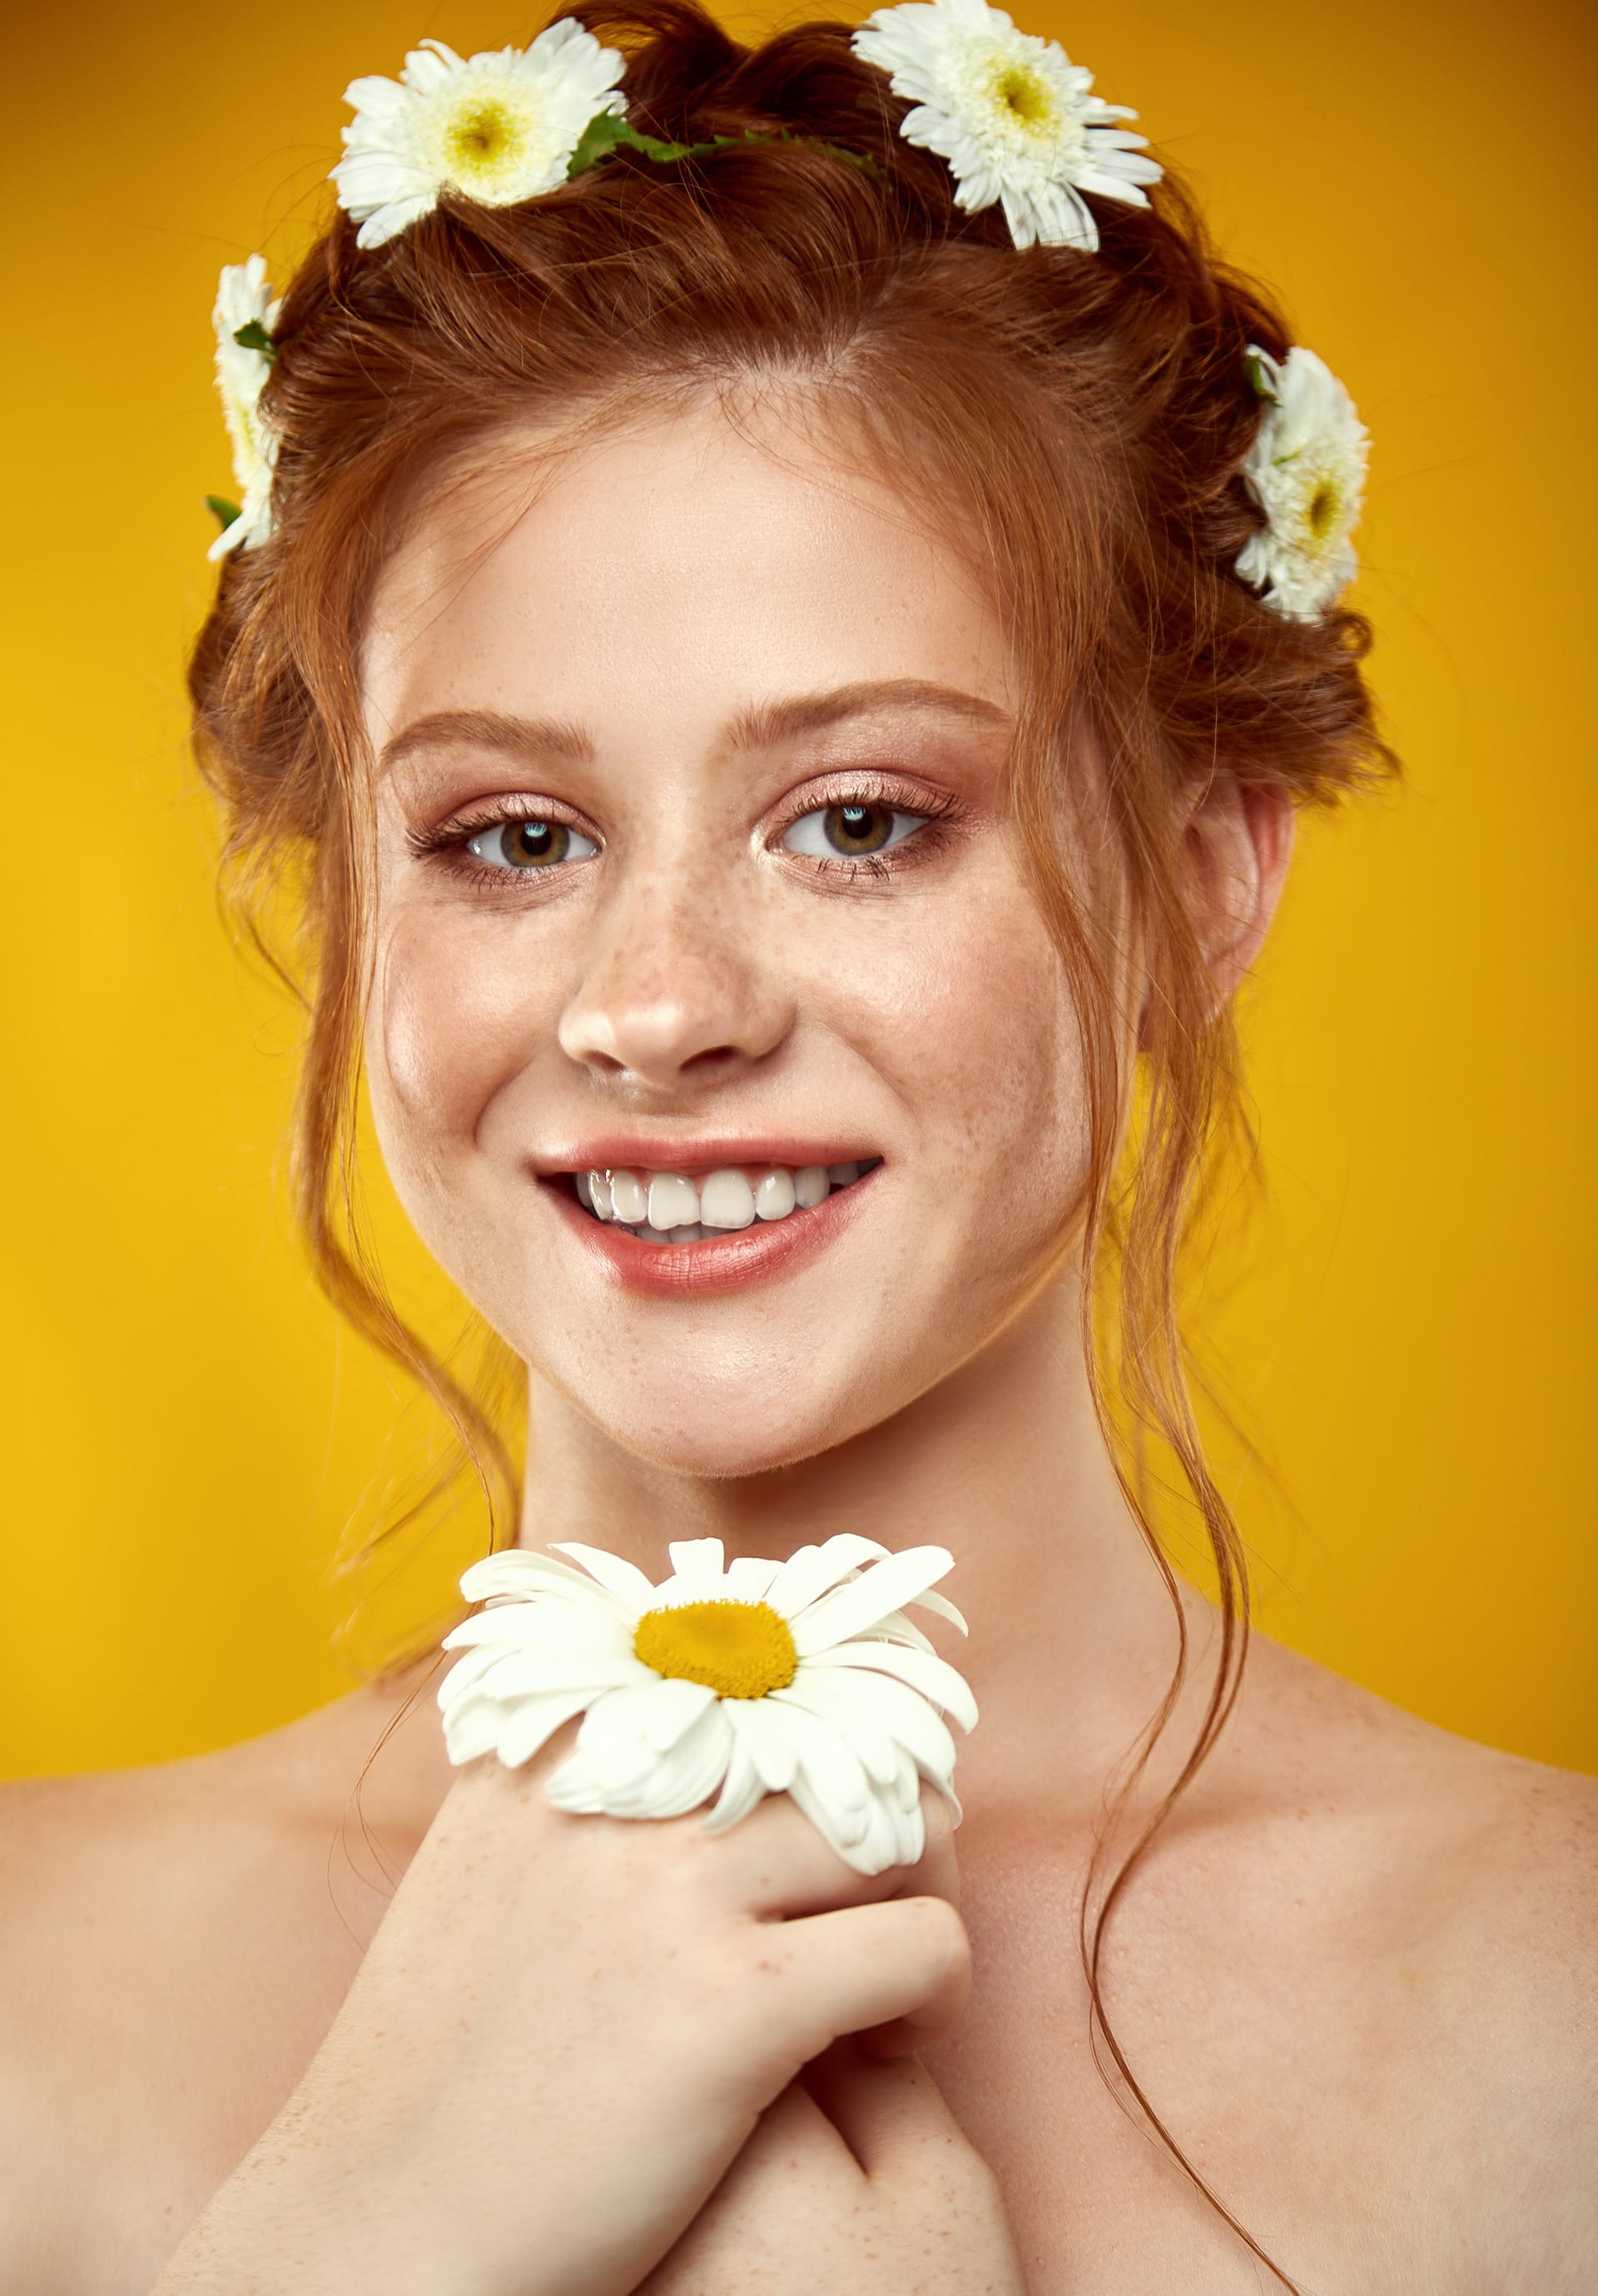 Beautiful positive redheaded girl with chamomile crown her head image